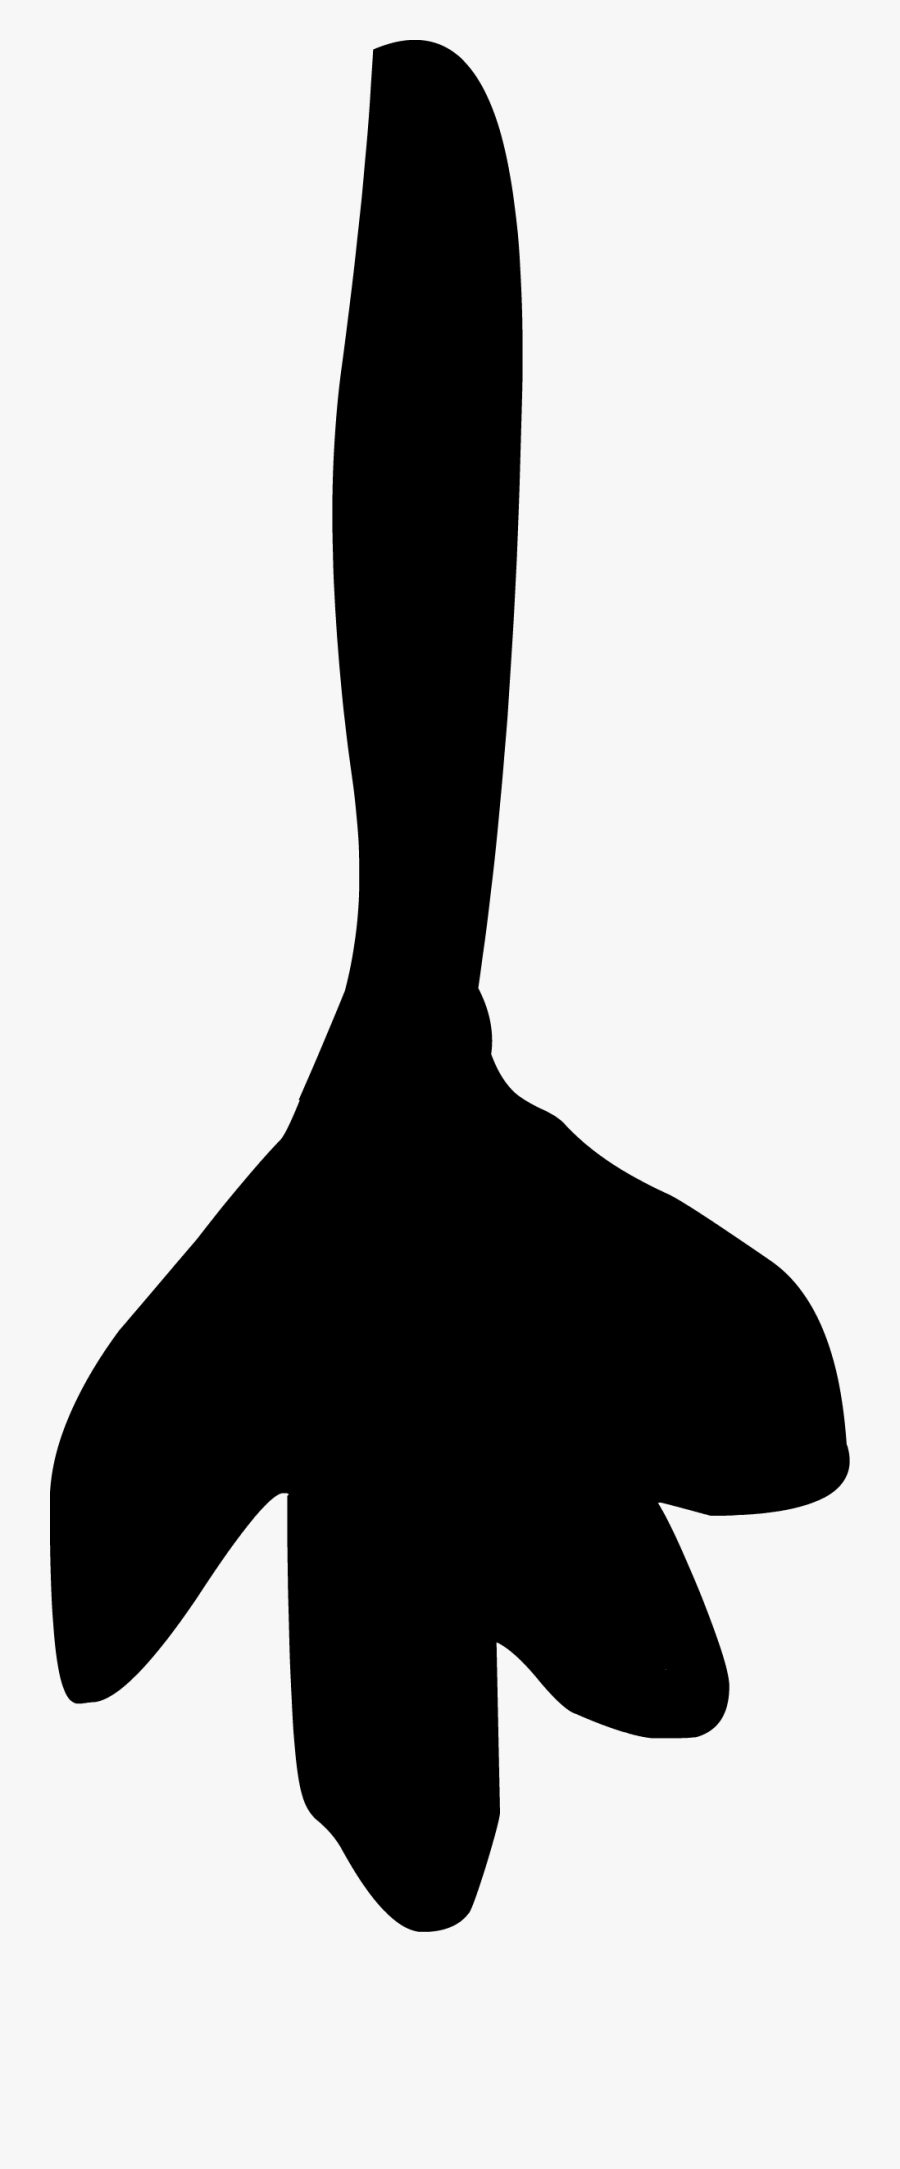 Image Open Bfdi S, Transparent Clipart